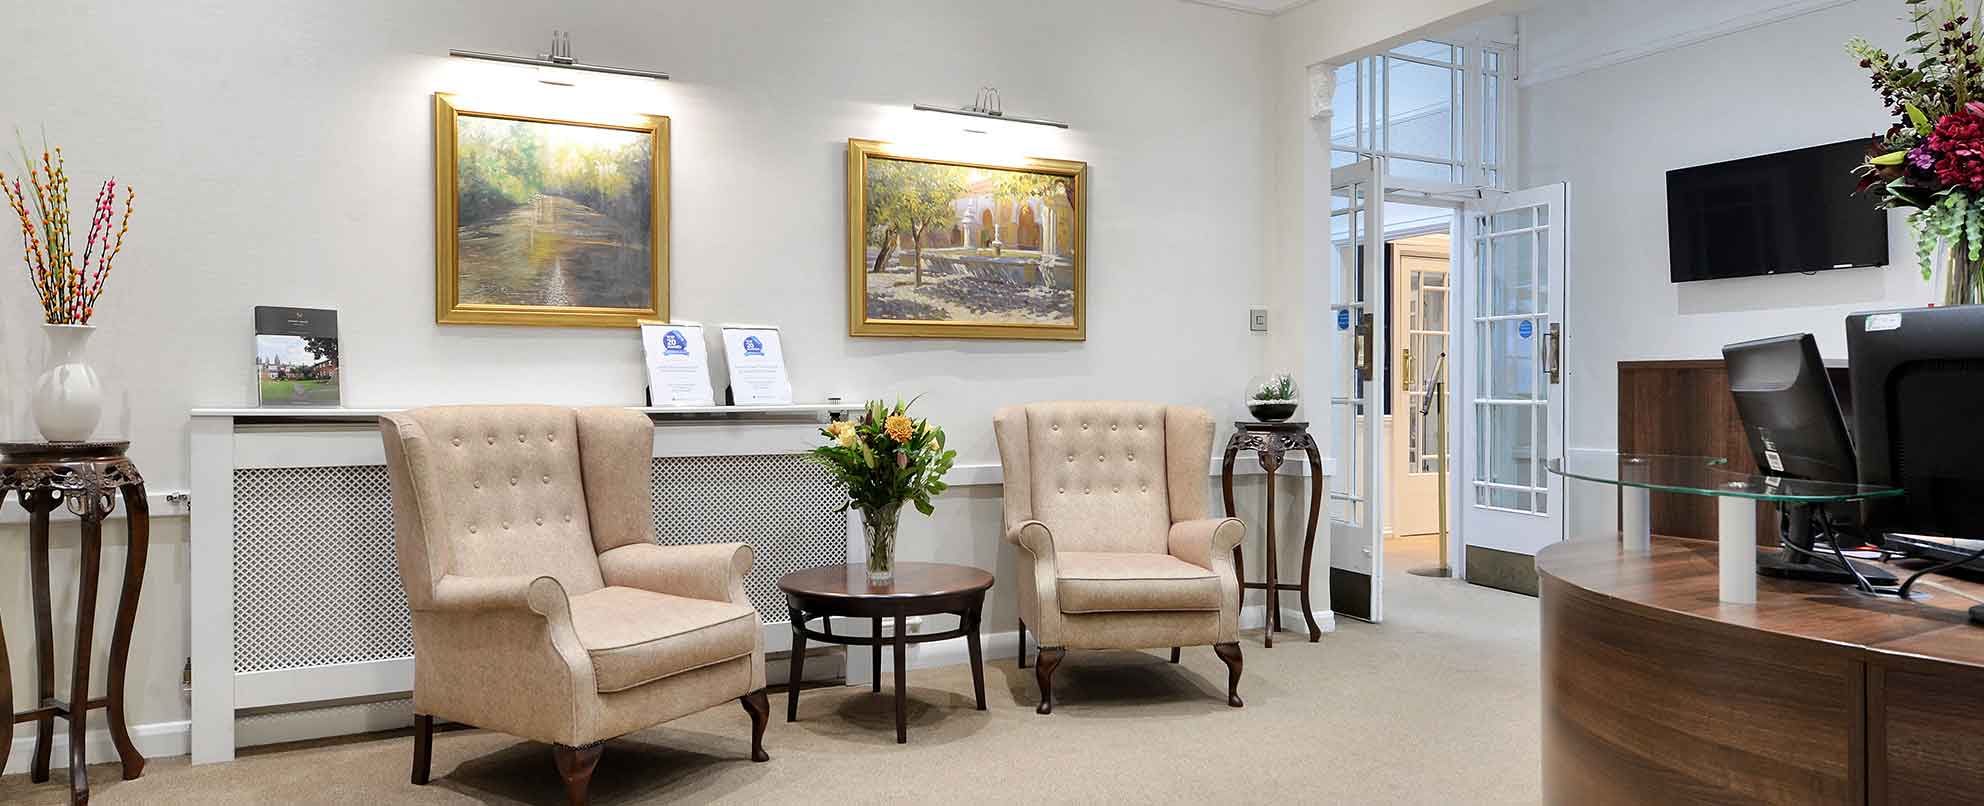 Dorset House Care Home in Droitwich